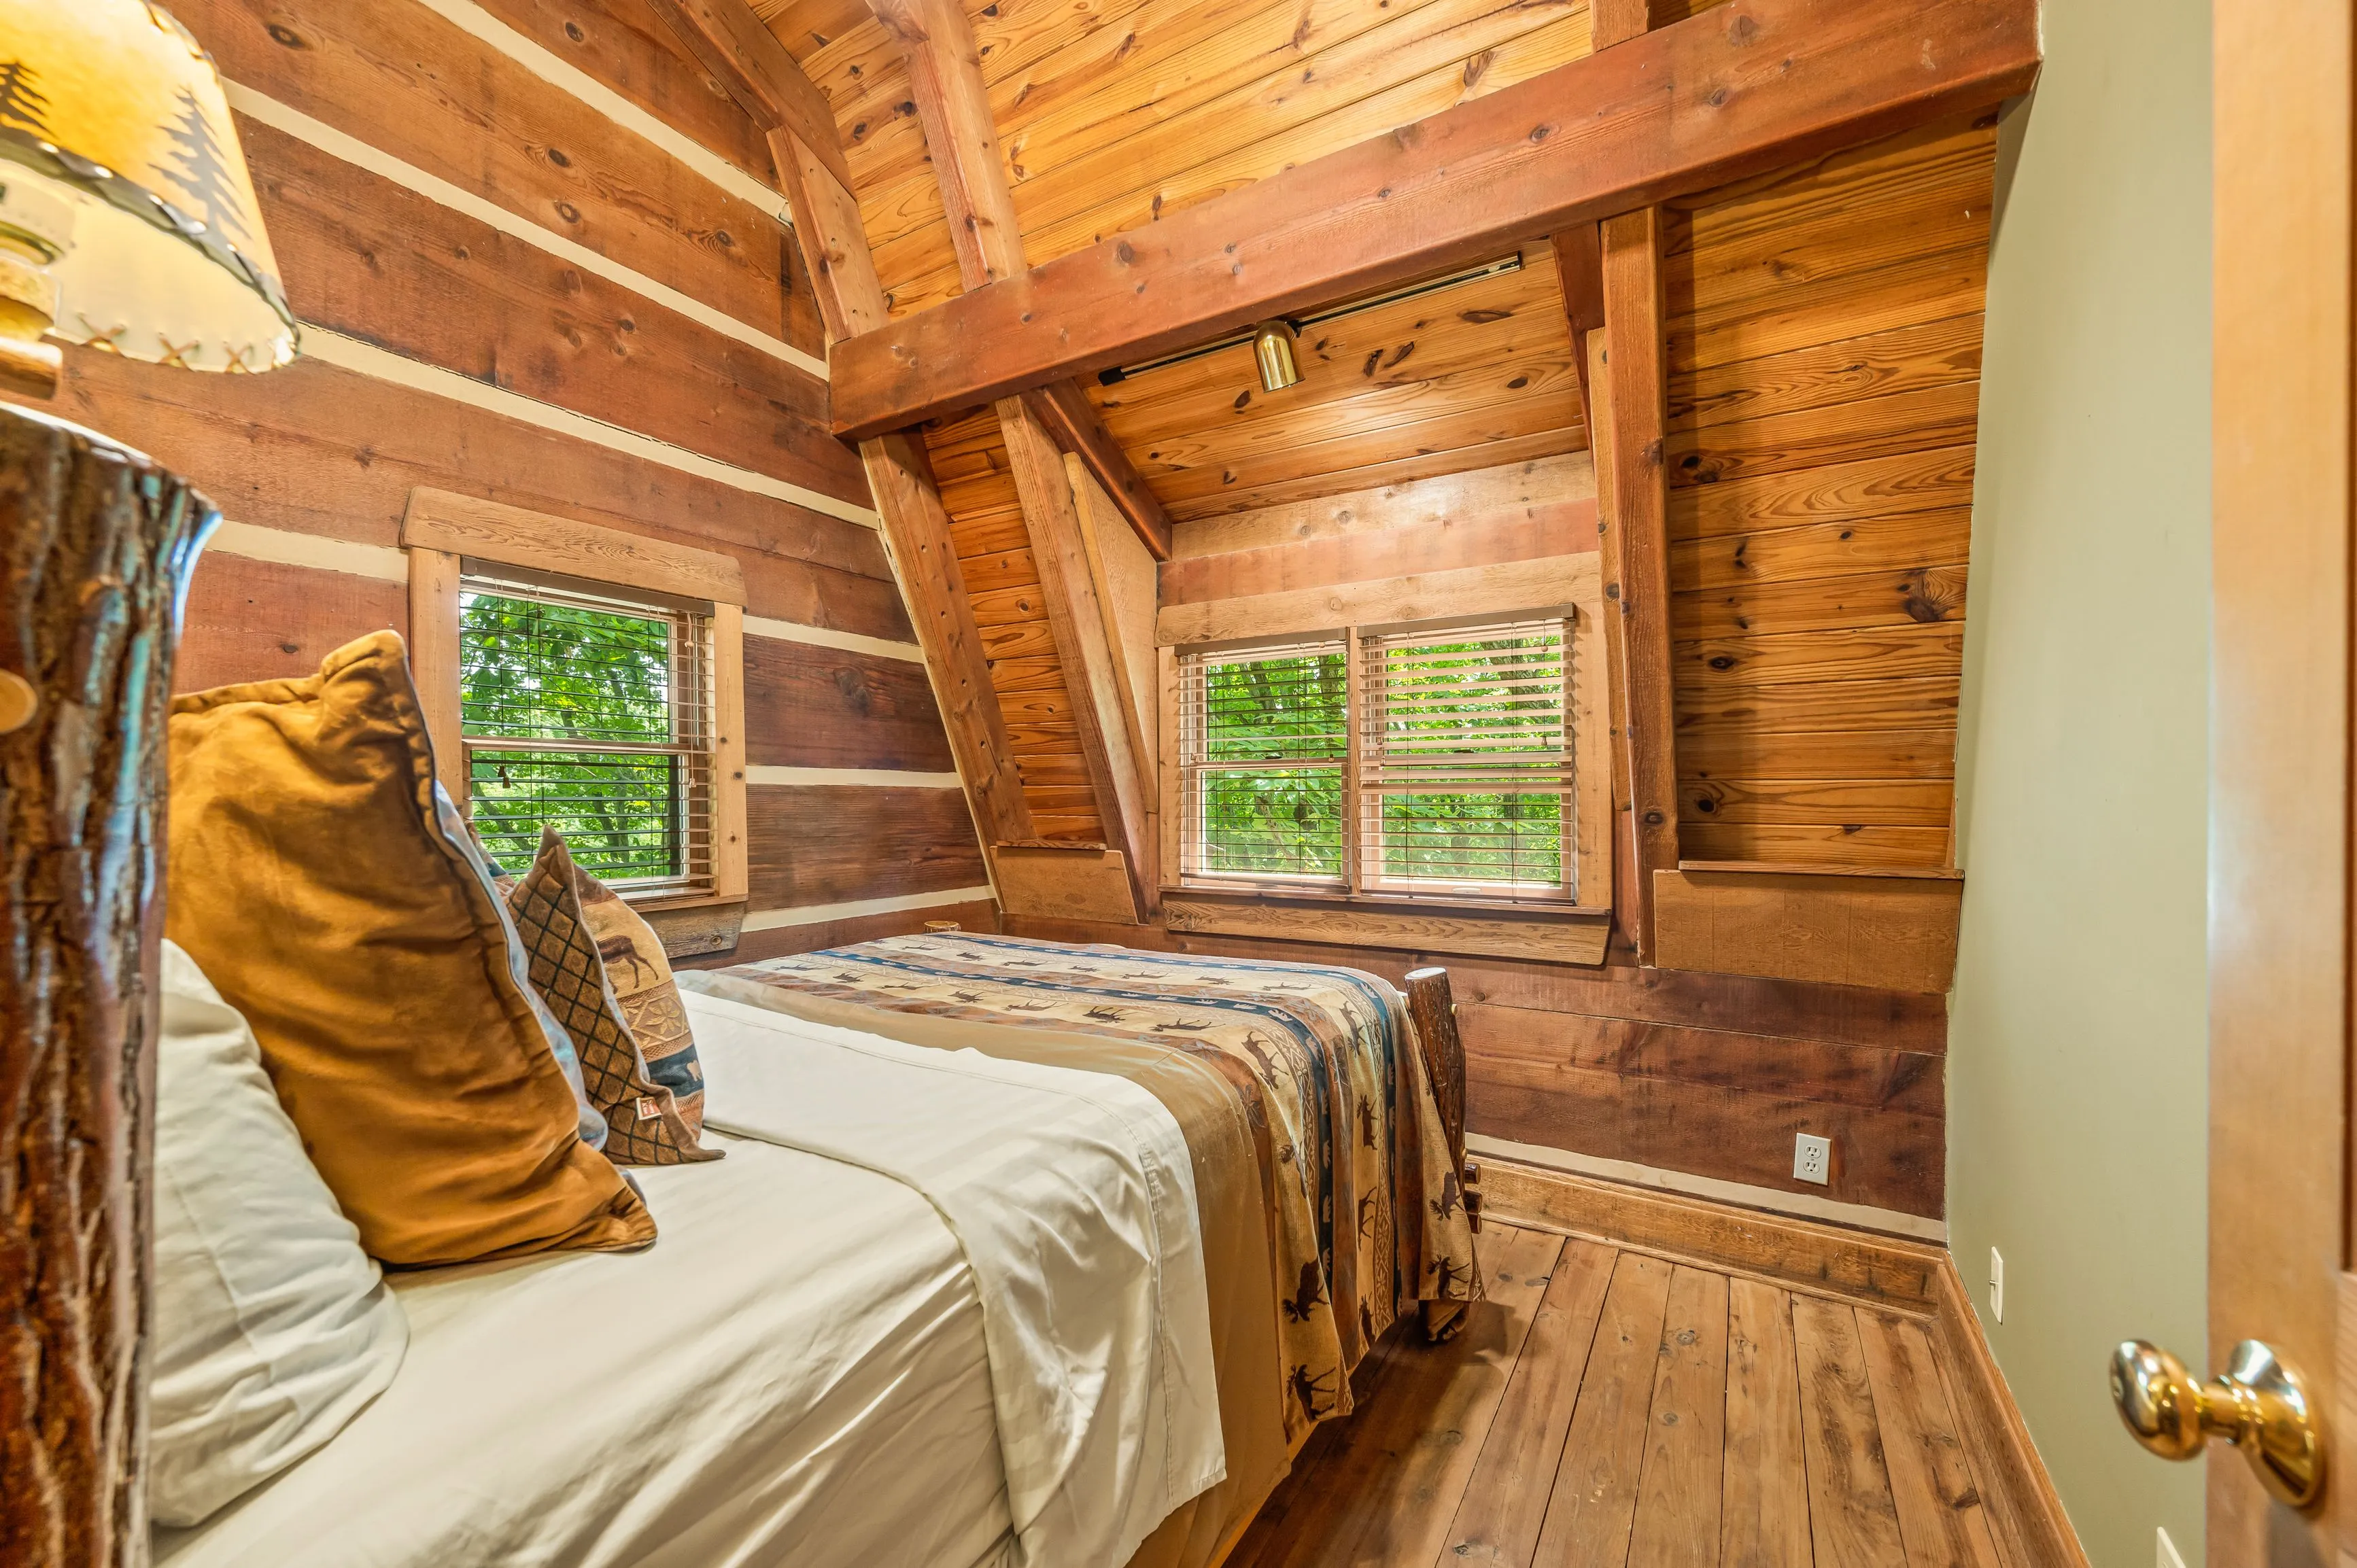 Cozy wooden cabin bedroom interior with a bed covered in a patterned quilt, rustic wood paneled walls, and windows overlooking greenery.